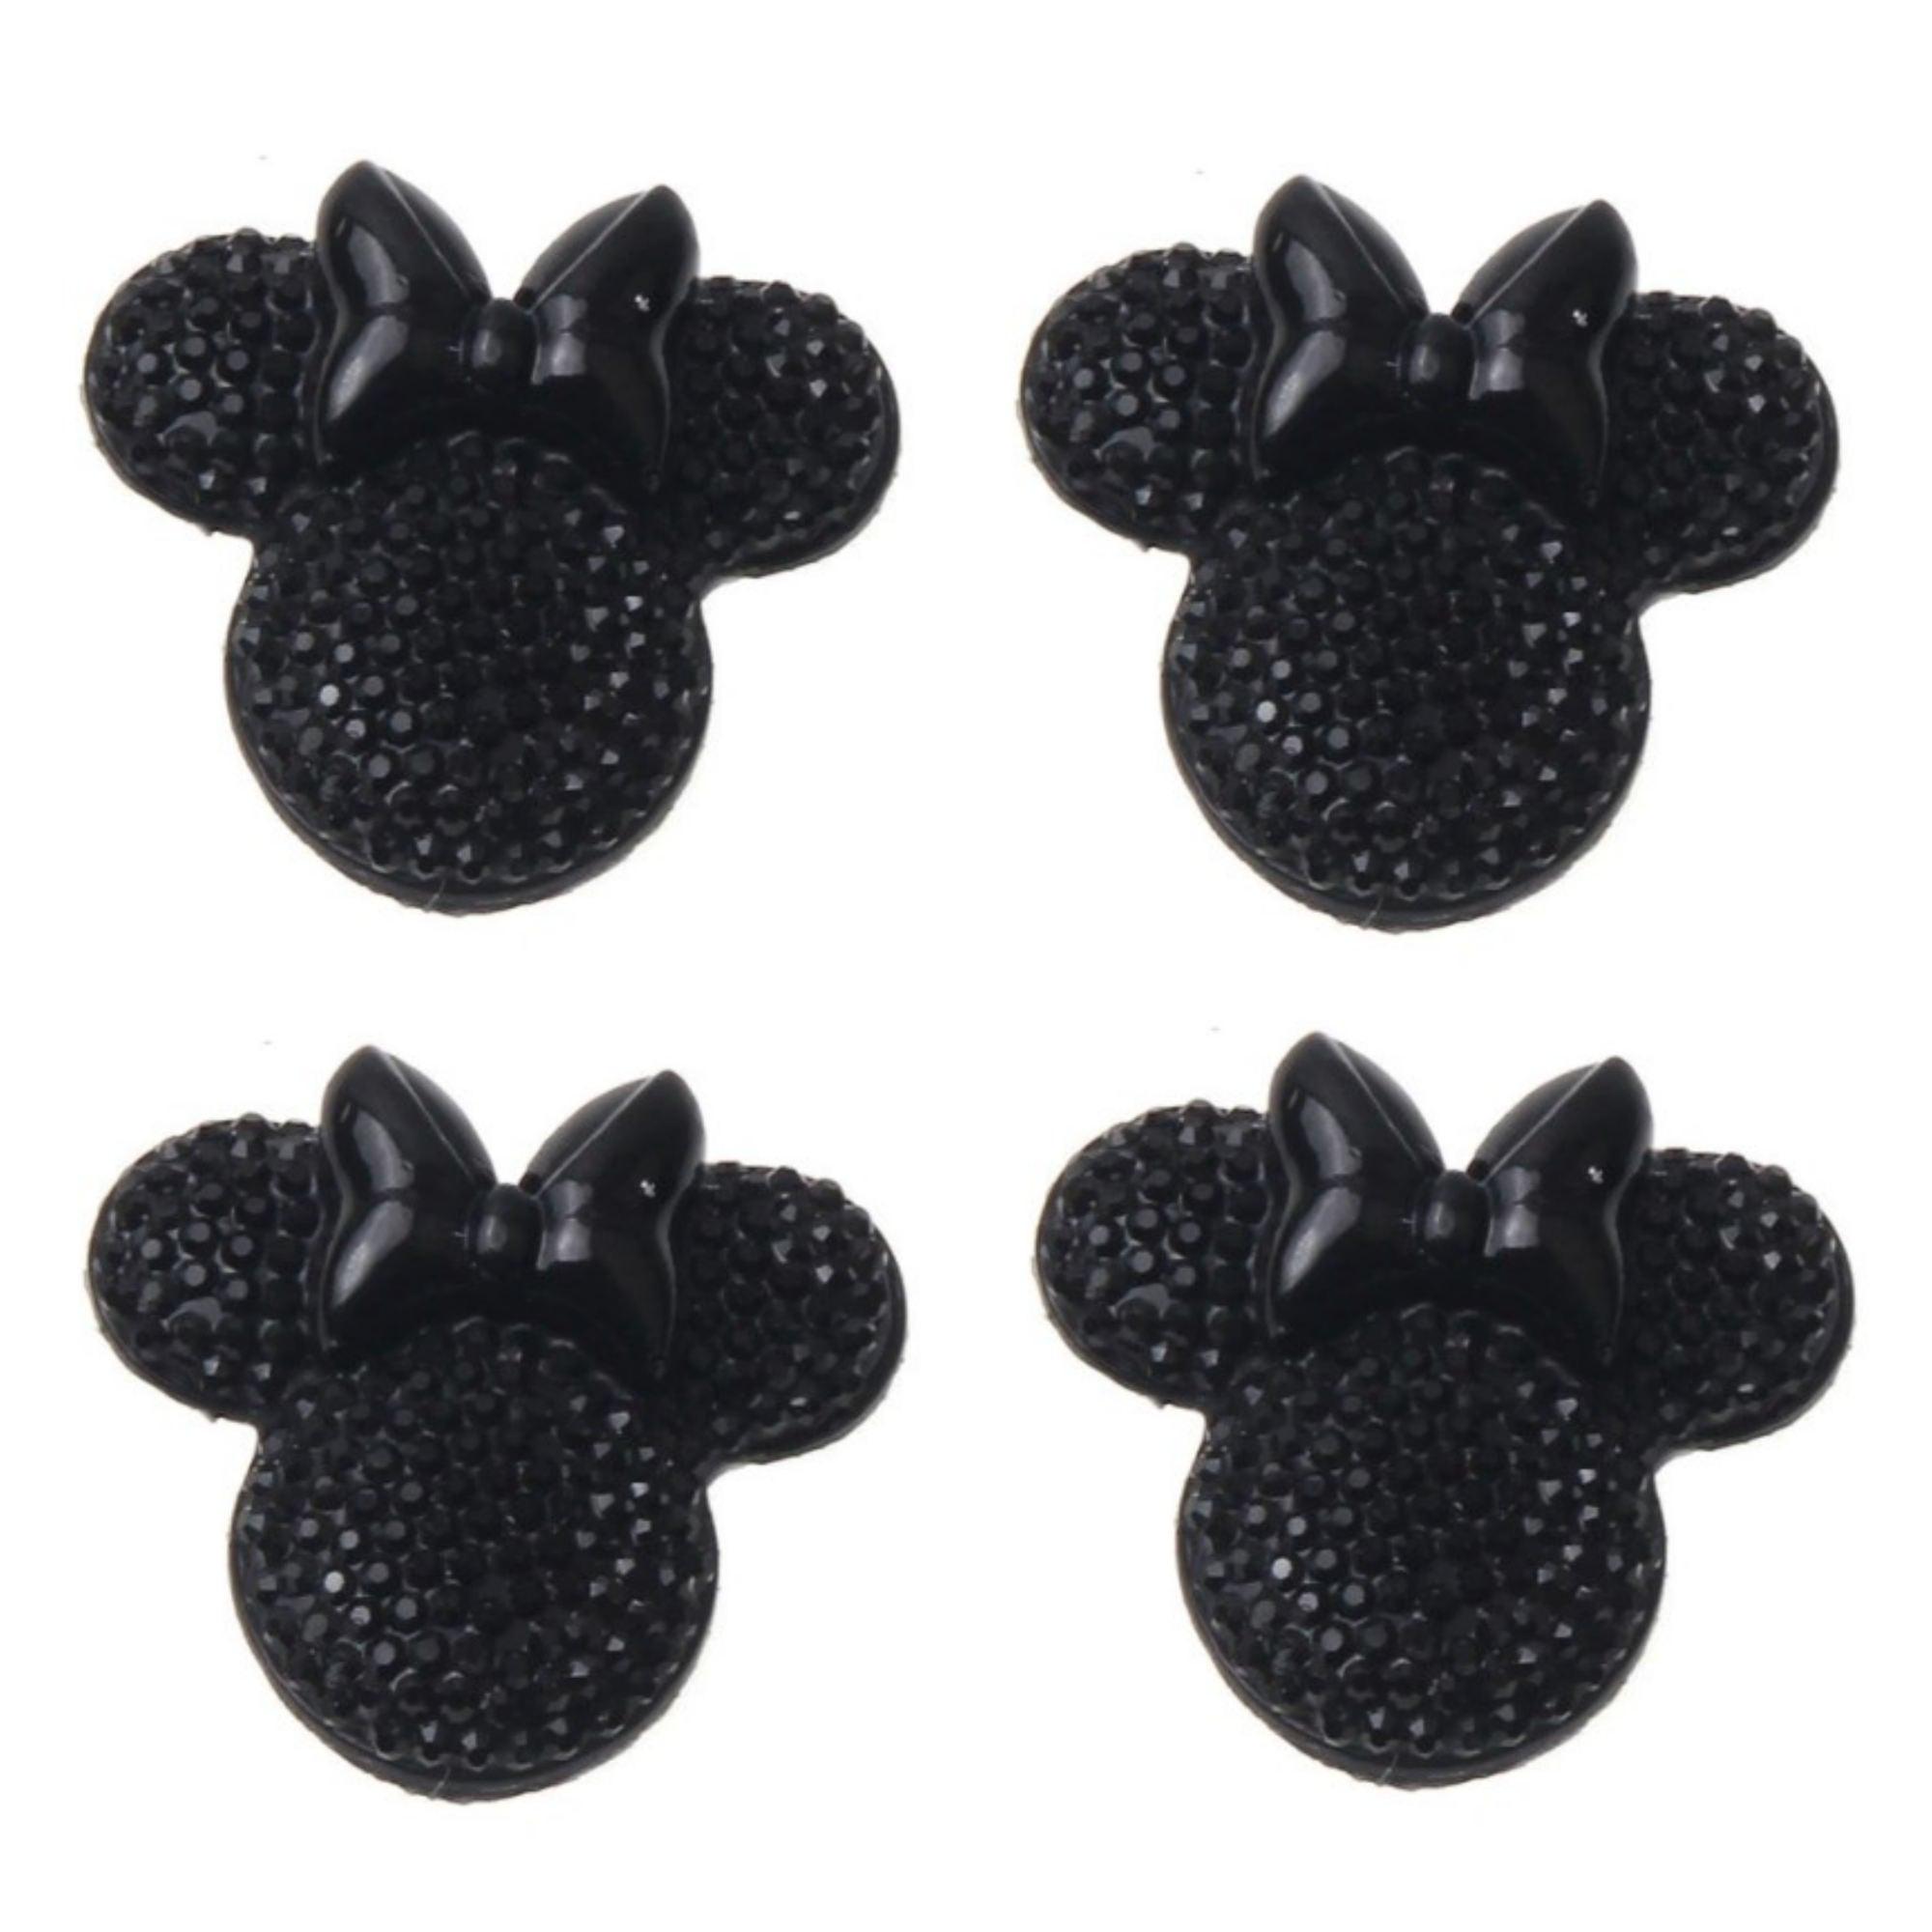 Disneyana Collection 1" Bling Black Mouse Ears & Bow Scrapbook Embellishments by SSC Designs - 4 Pieces